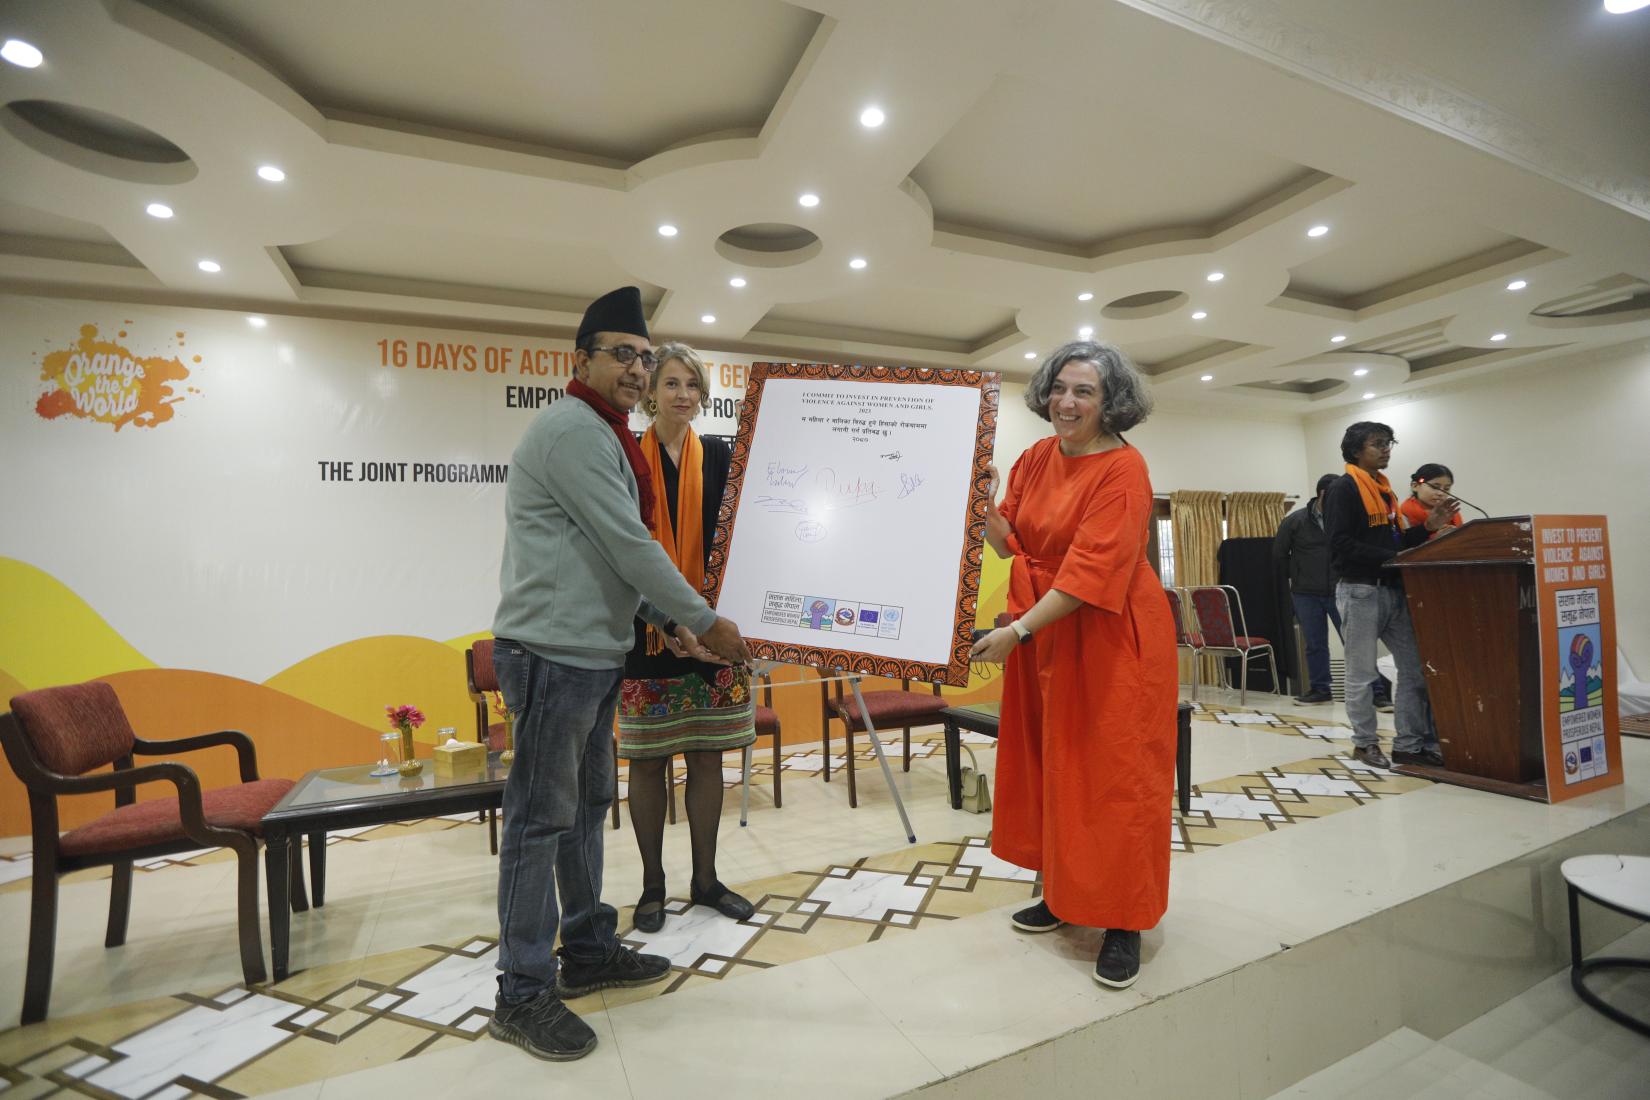 Two women and one man are standing on the stage, transferring the signed commitment plaque to the man. In the background, a boy and a girl stand on a podium, facing the audience.